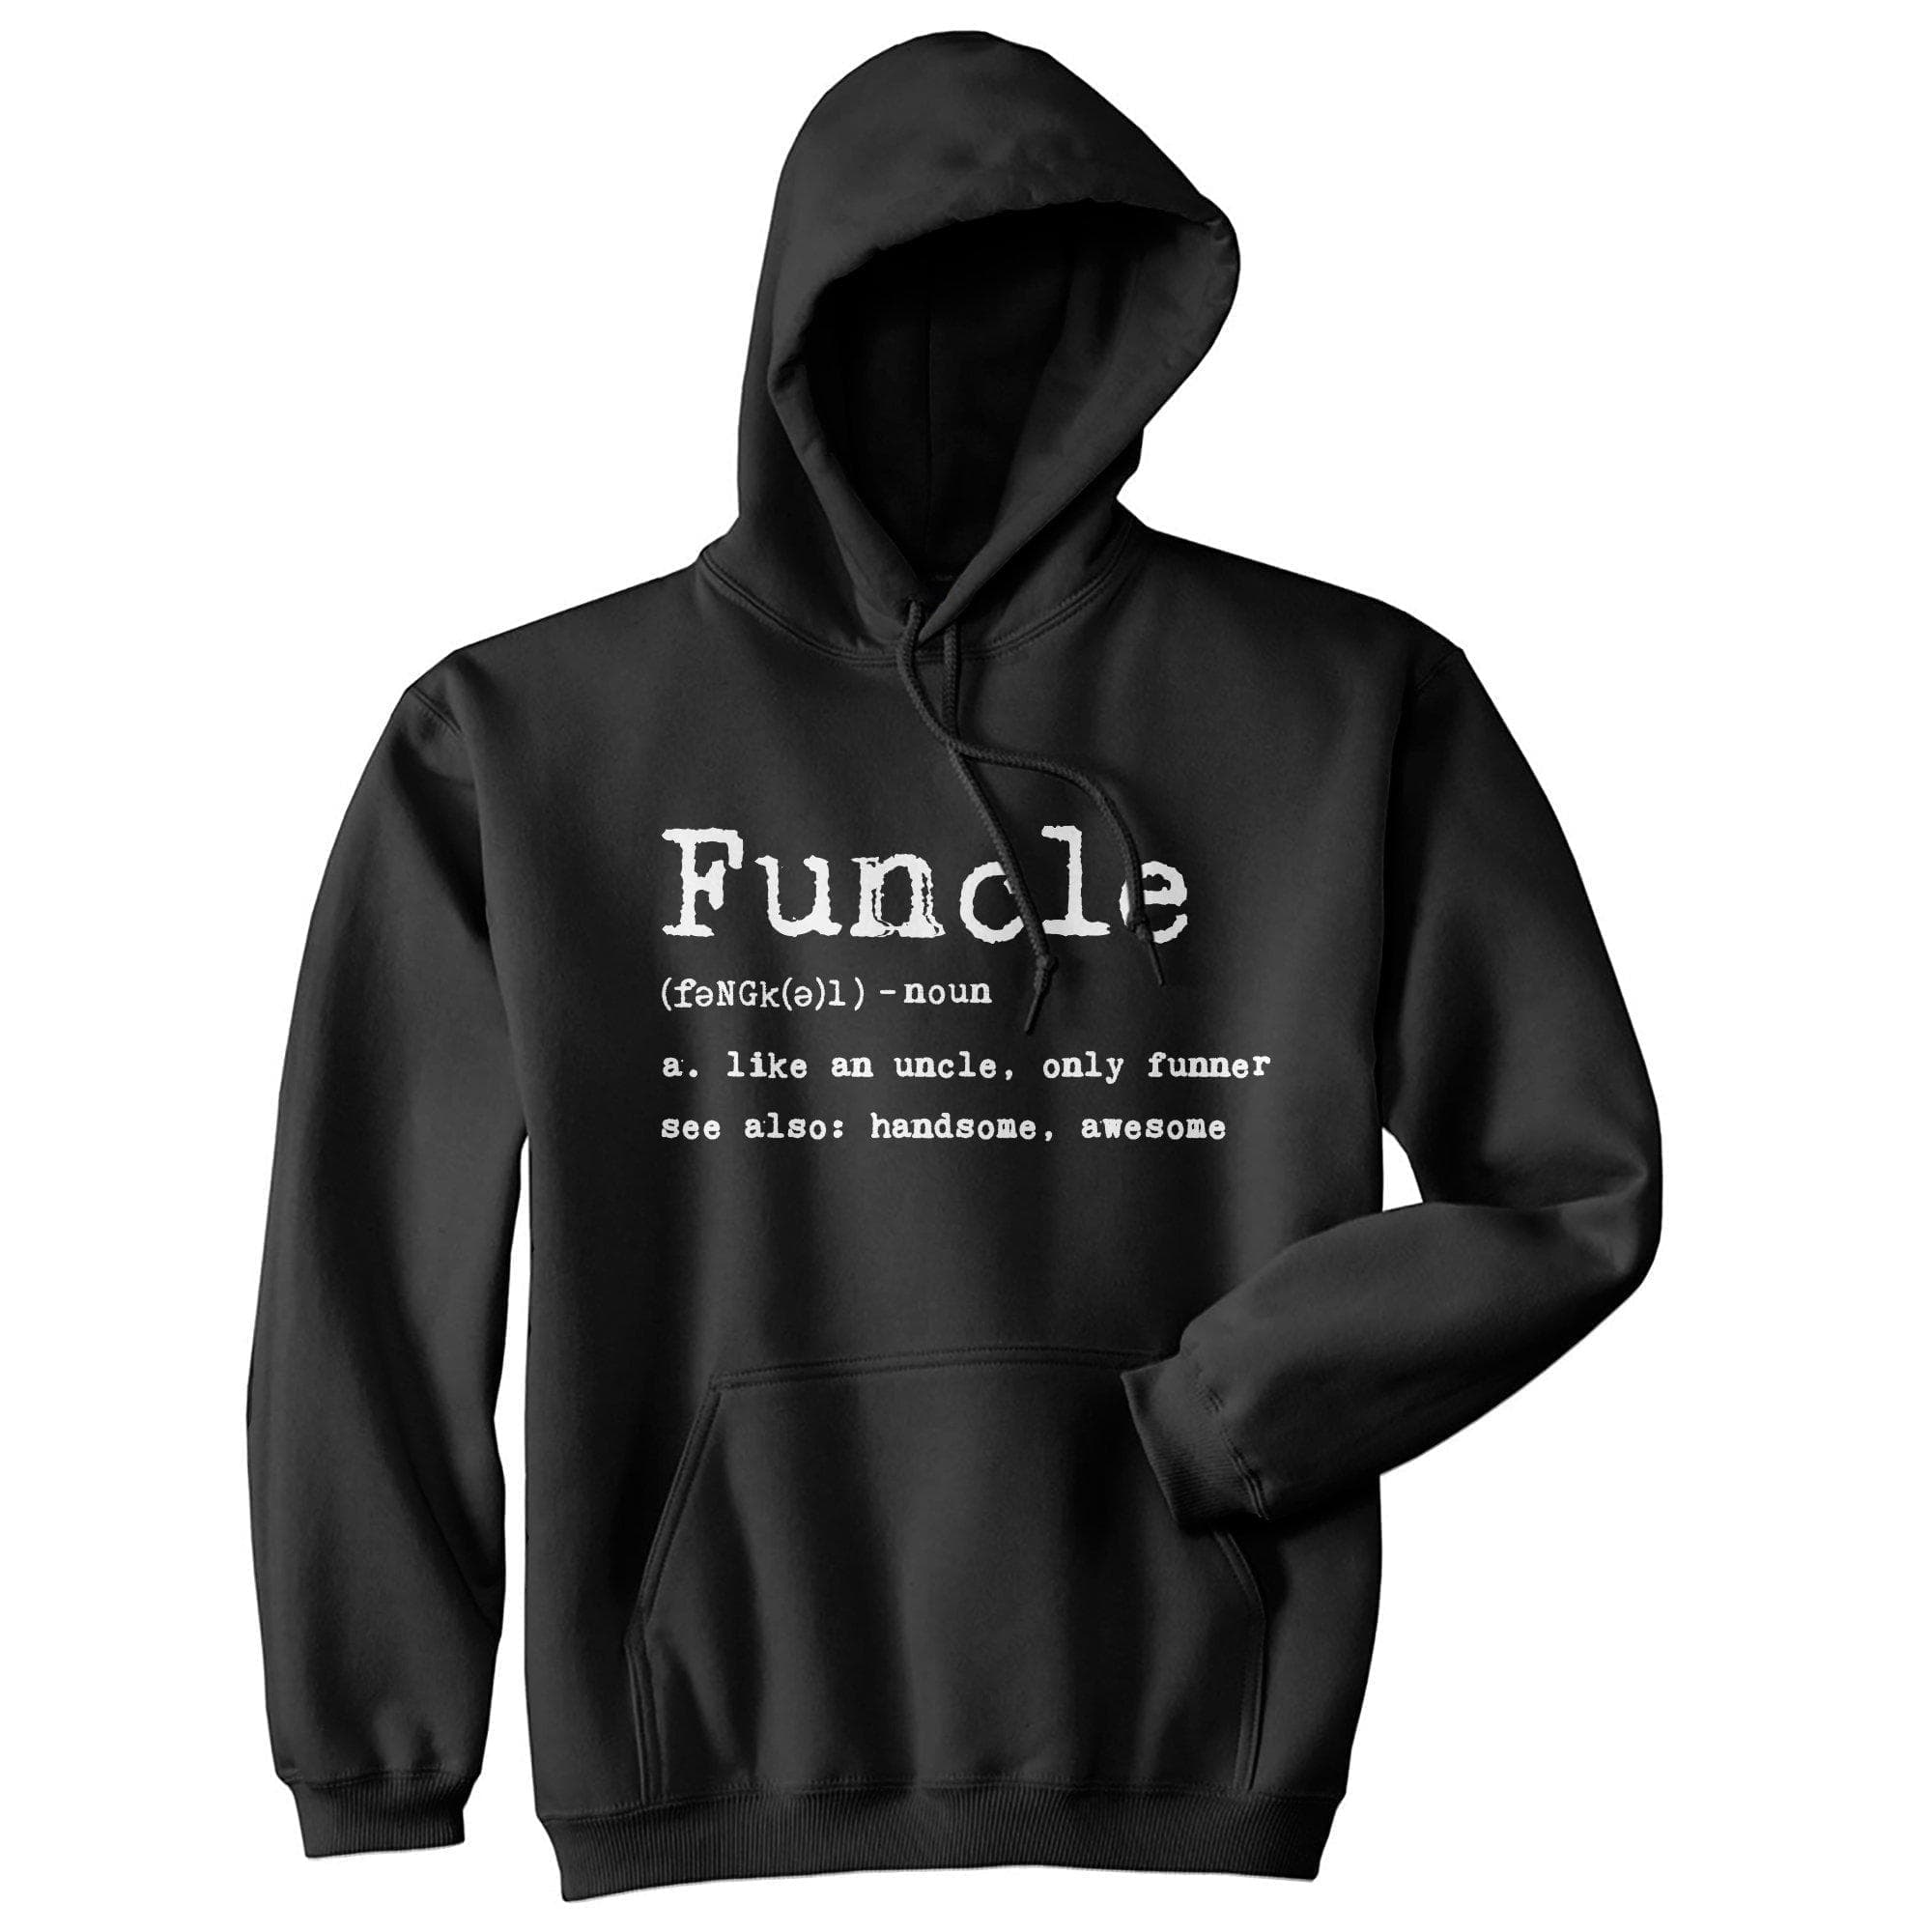 Funcle Definition Hoodie - Crazy Dog T-Shirts